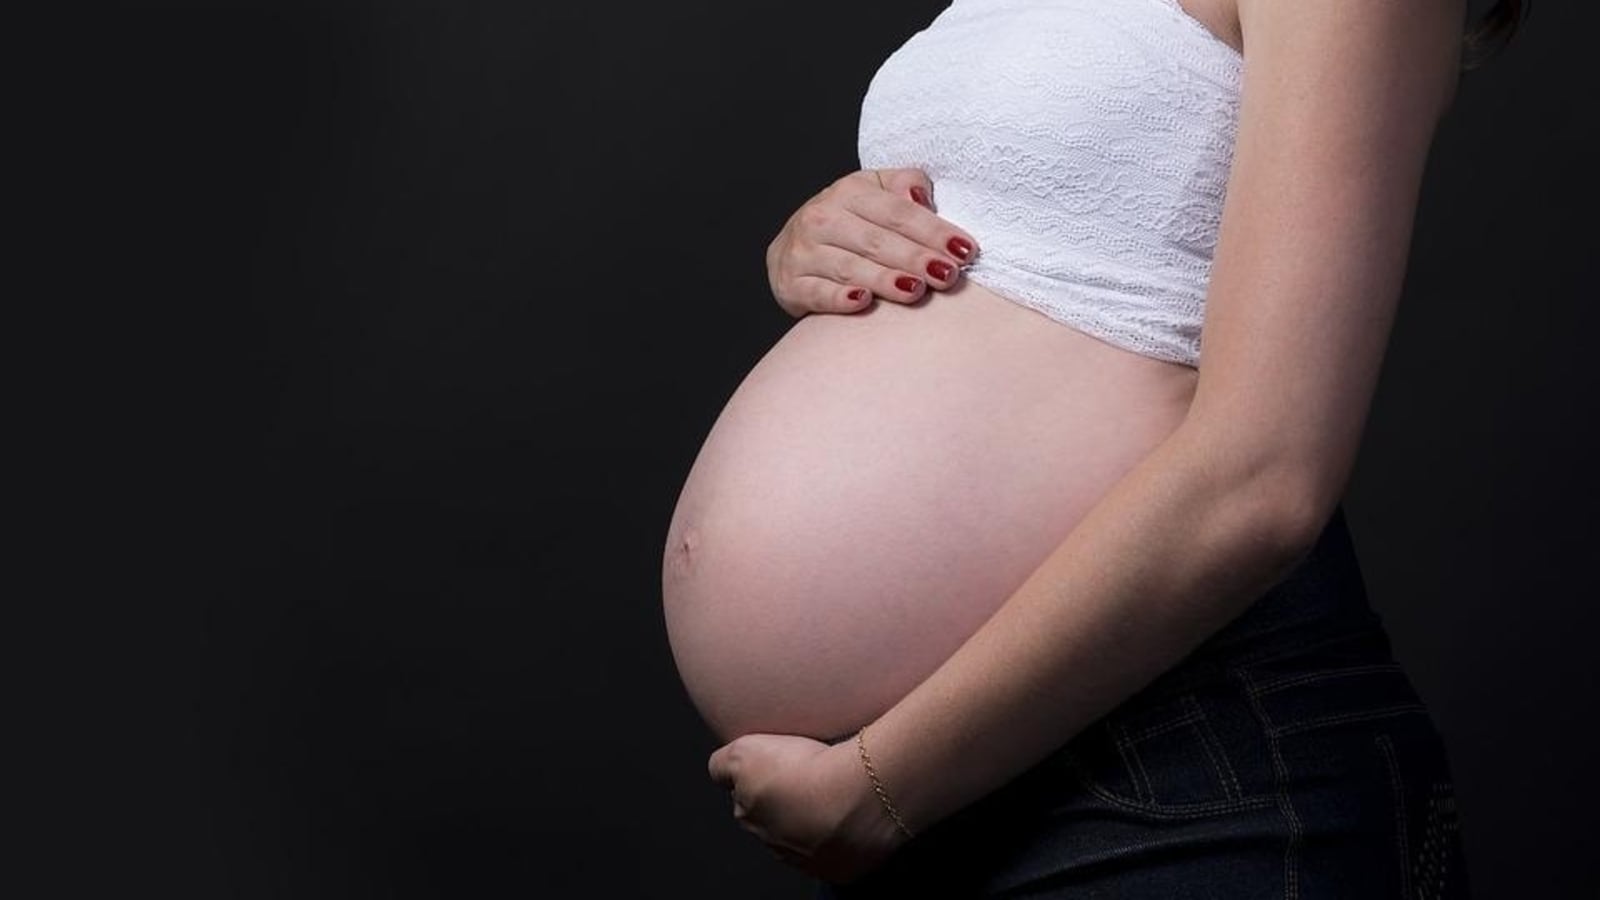 Diet with seafood, eggs, grains, and veggies may lower miscarriage risk: Study